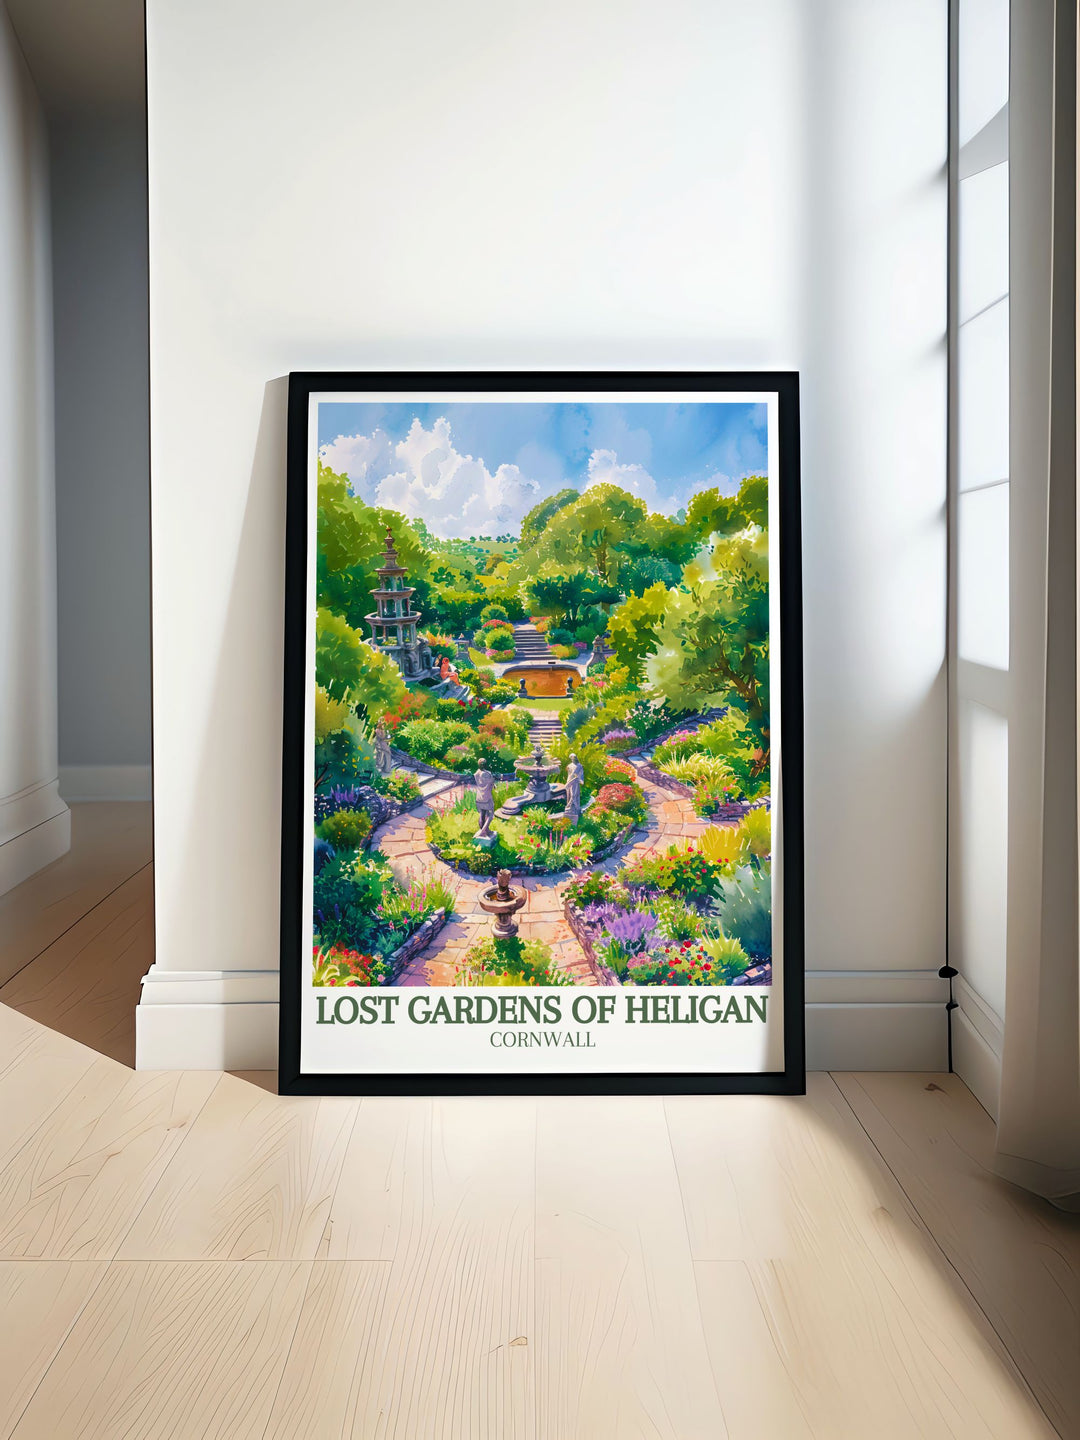 Stunning Cornwall Wall Art showcasing the vibrant landscapes and serene beauty of the Lost Gardens Heligan and Italian garden Productive gardens perfect for adding elegance and natural charm to your home decor